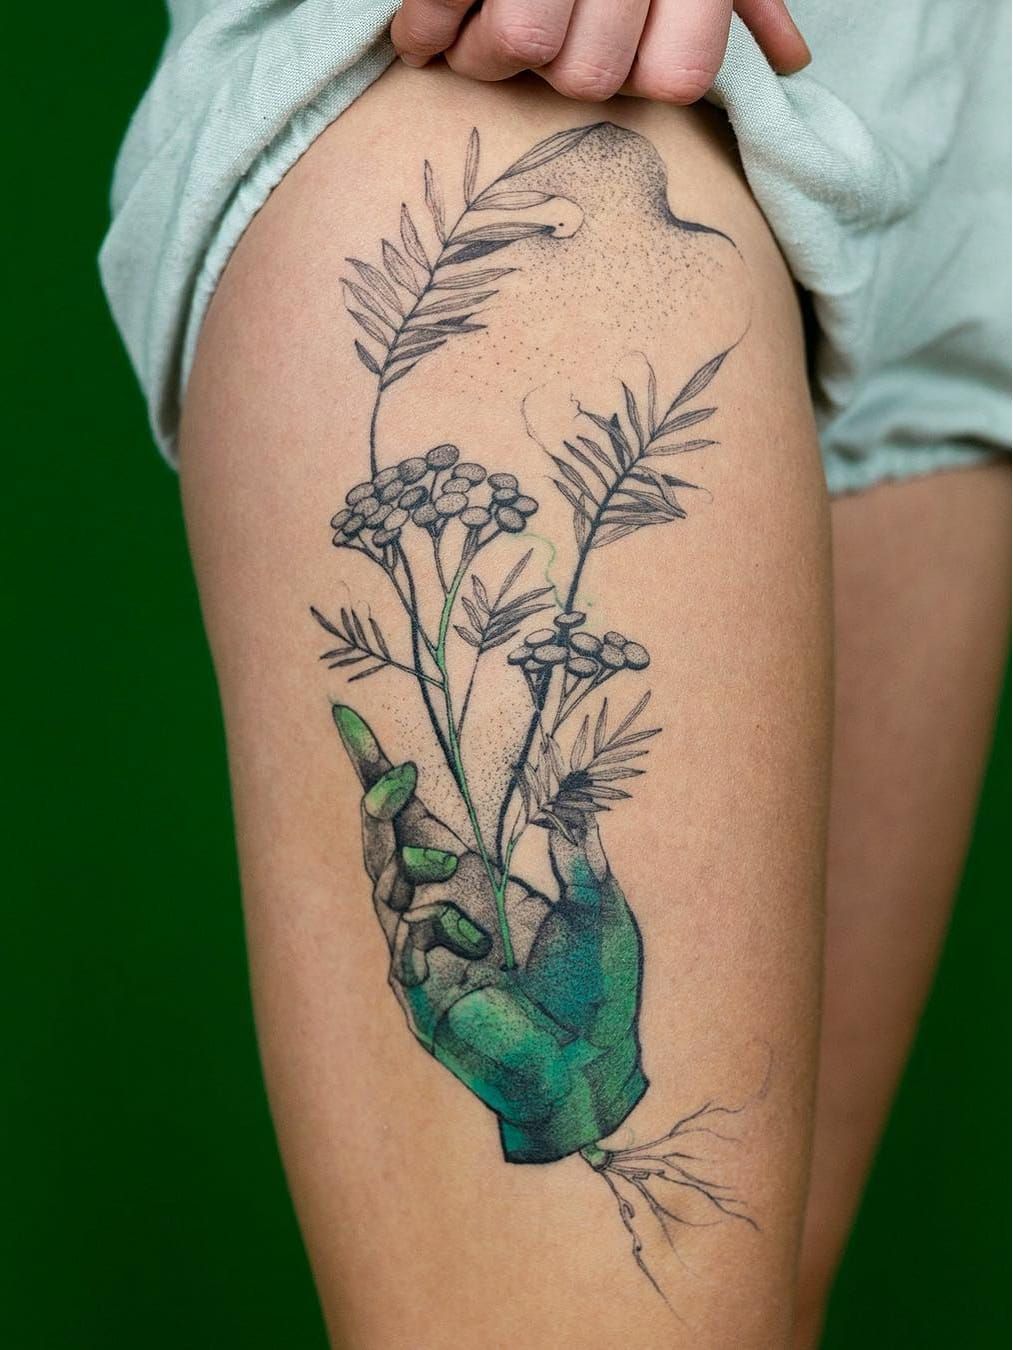 30 Best Tree Tattoo Ideas You Should Check